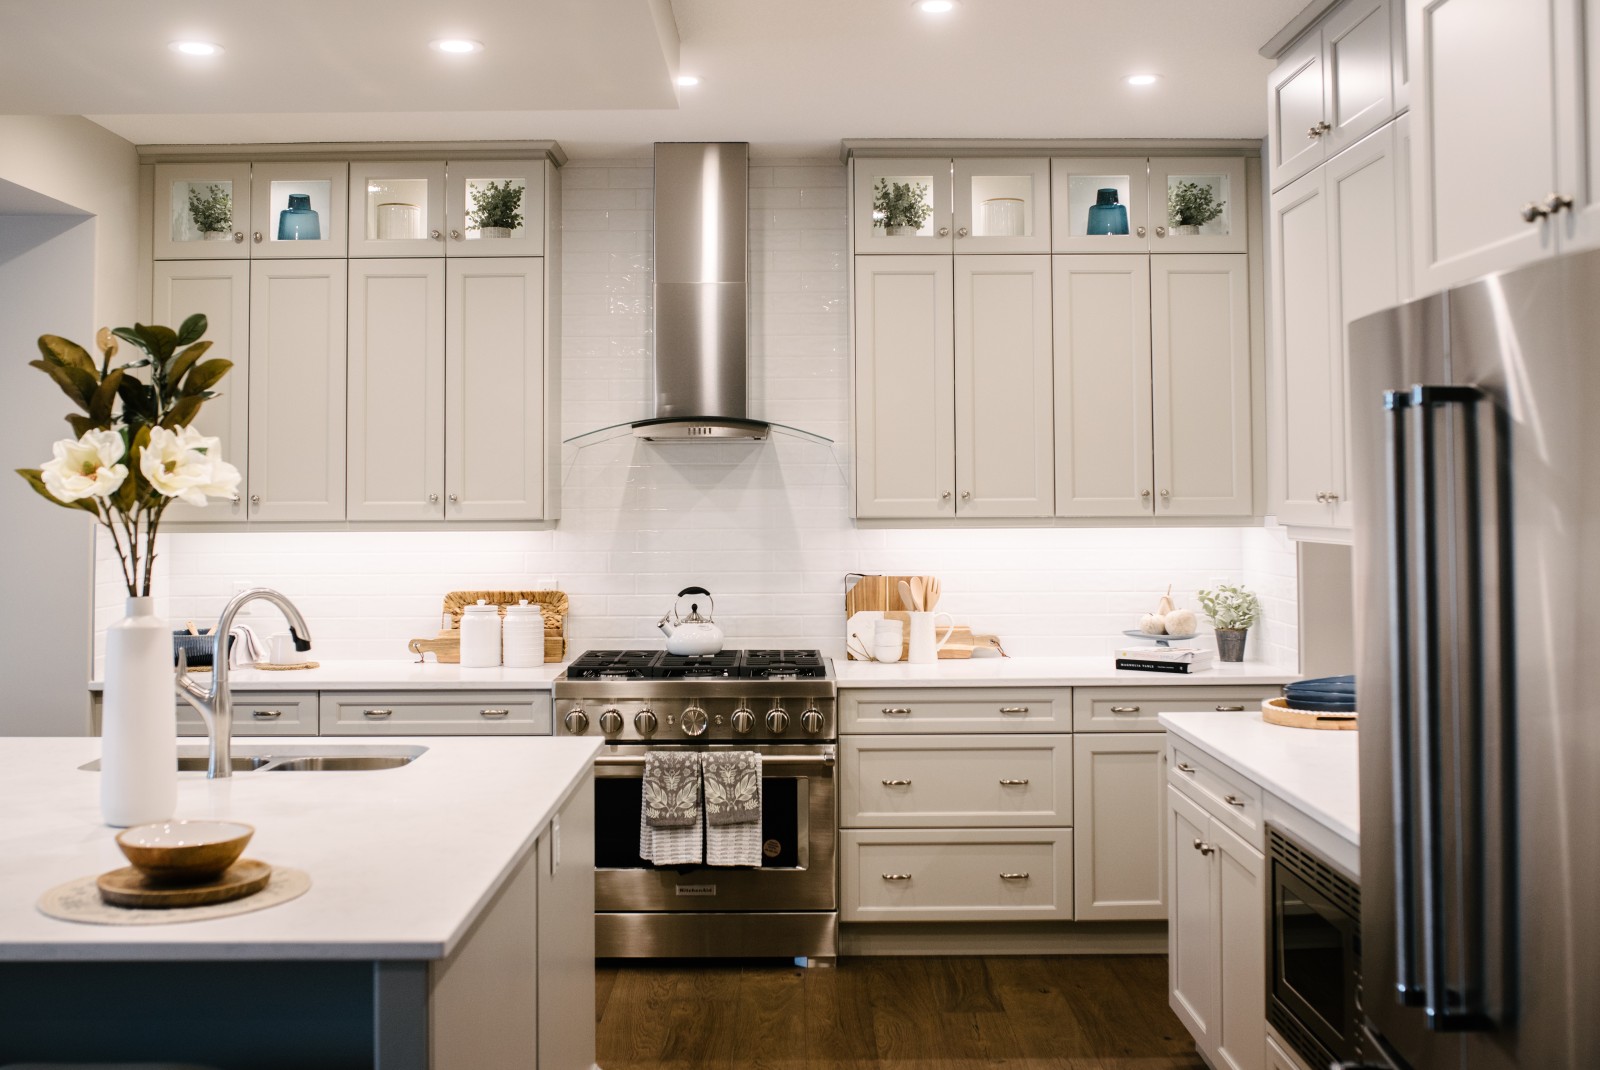 The range wall of a kitchen with light grey/beige stacked cabinets, white backsplash and countertops, stainless steel appliances, accessorized with warm wood